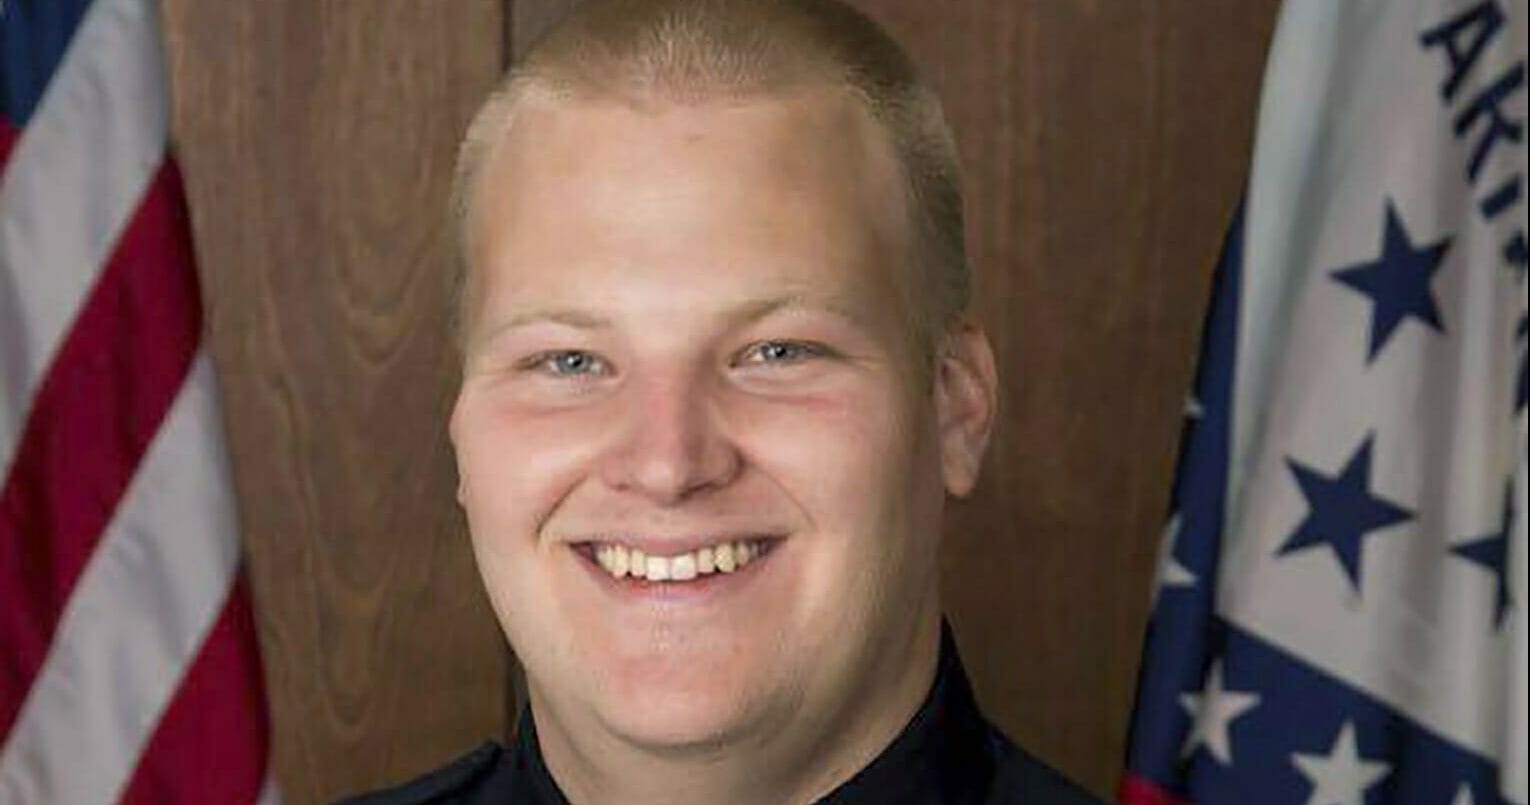 This undated photo provided by the Fayetteville Police Department shows Officer Stephen Carr. Carr was fatally shot on Dec. 7, 2019, while sitting in his patrol vehicle outside police headquarters in Fayetteville, Arkansas.